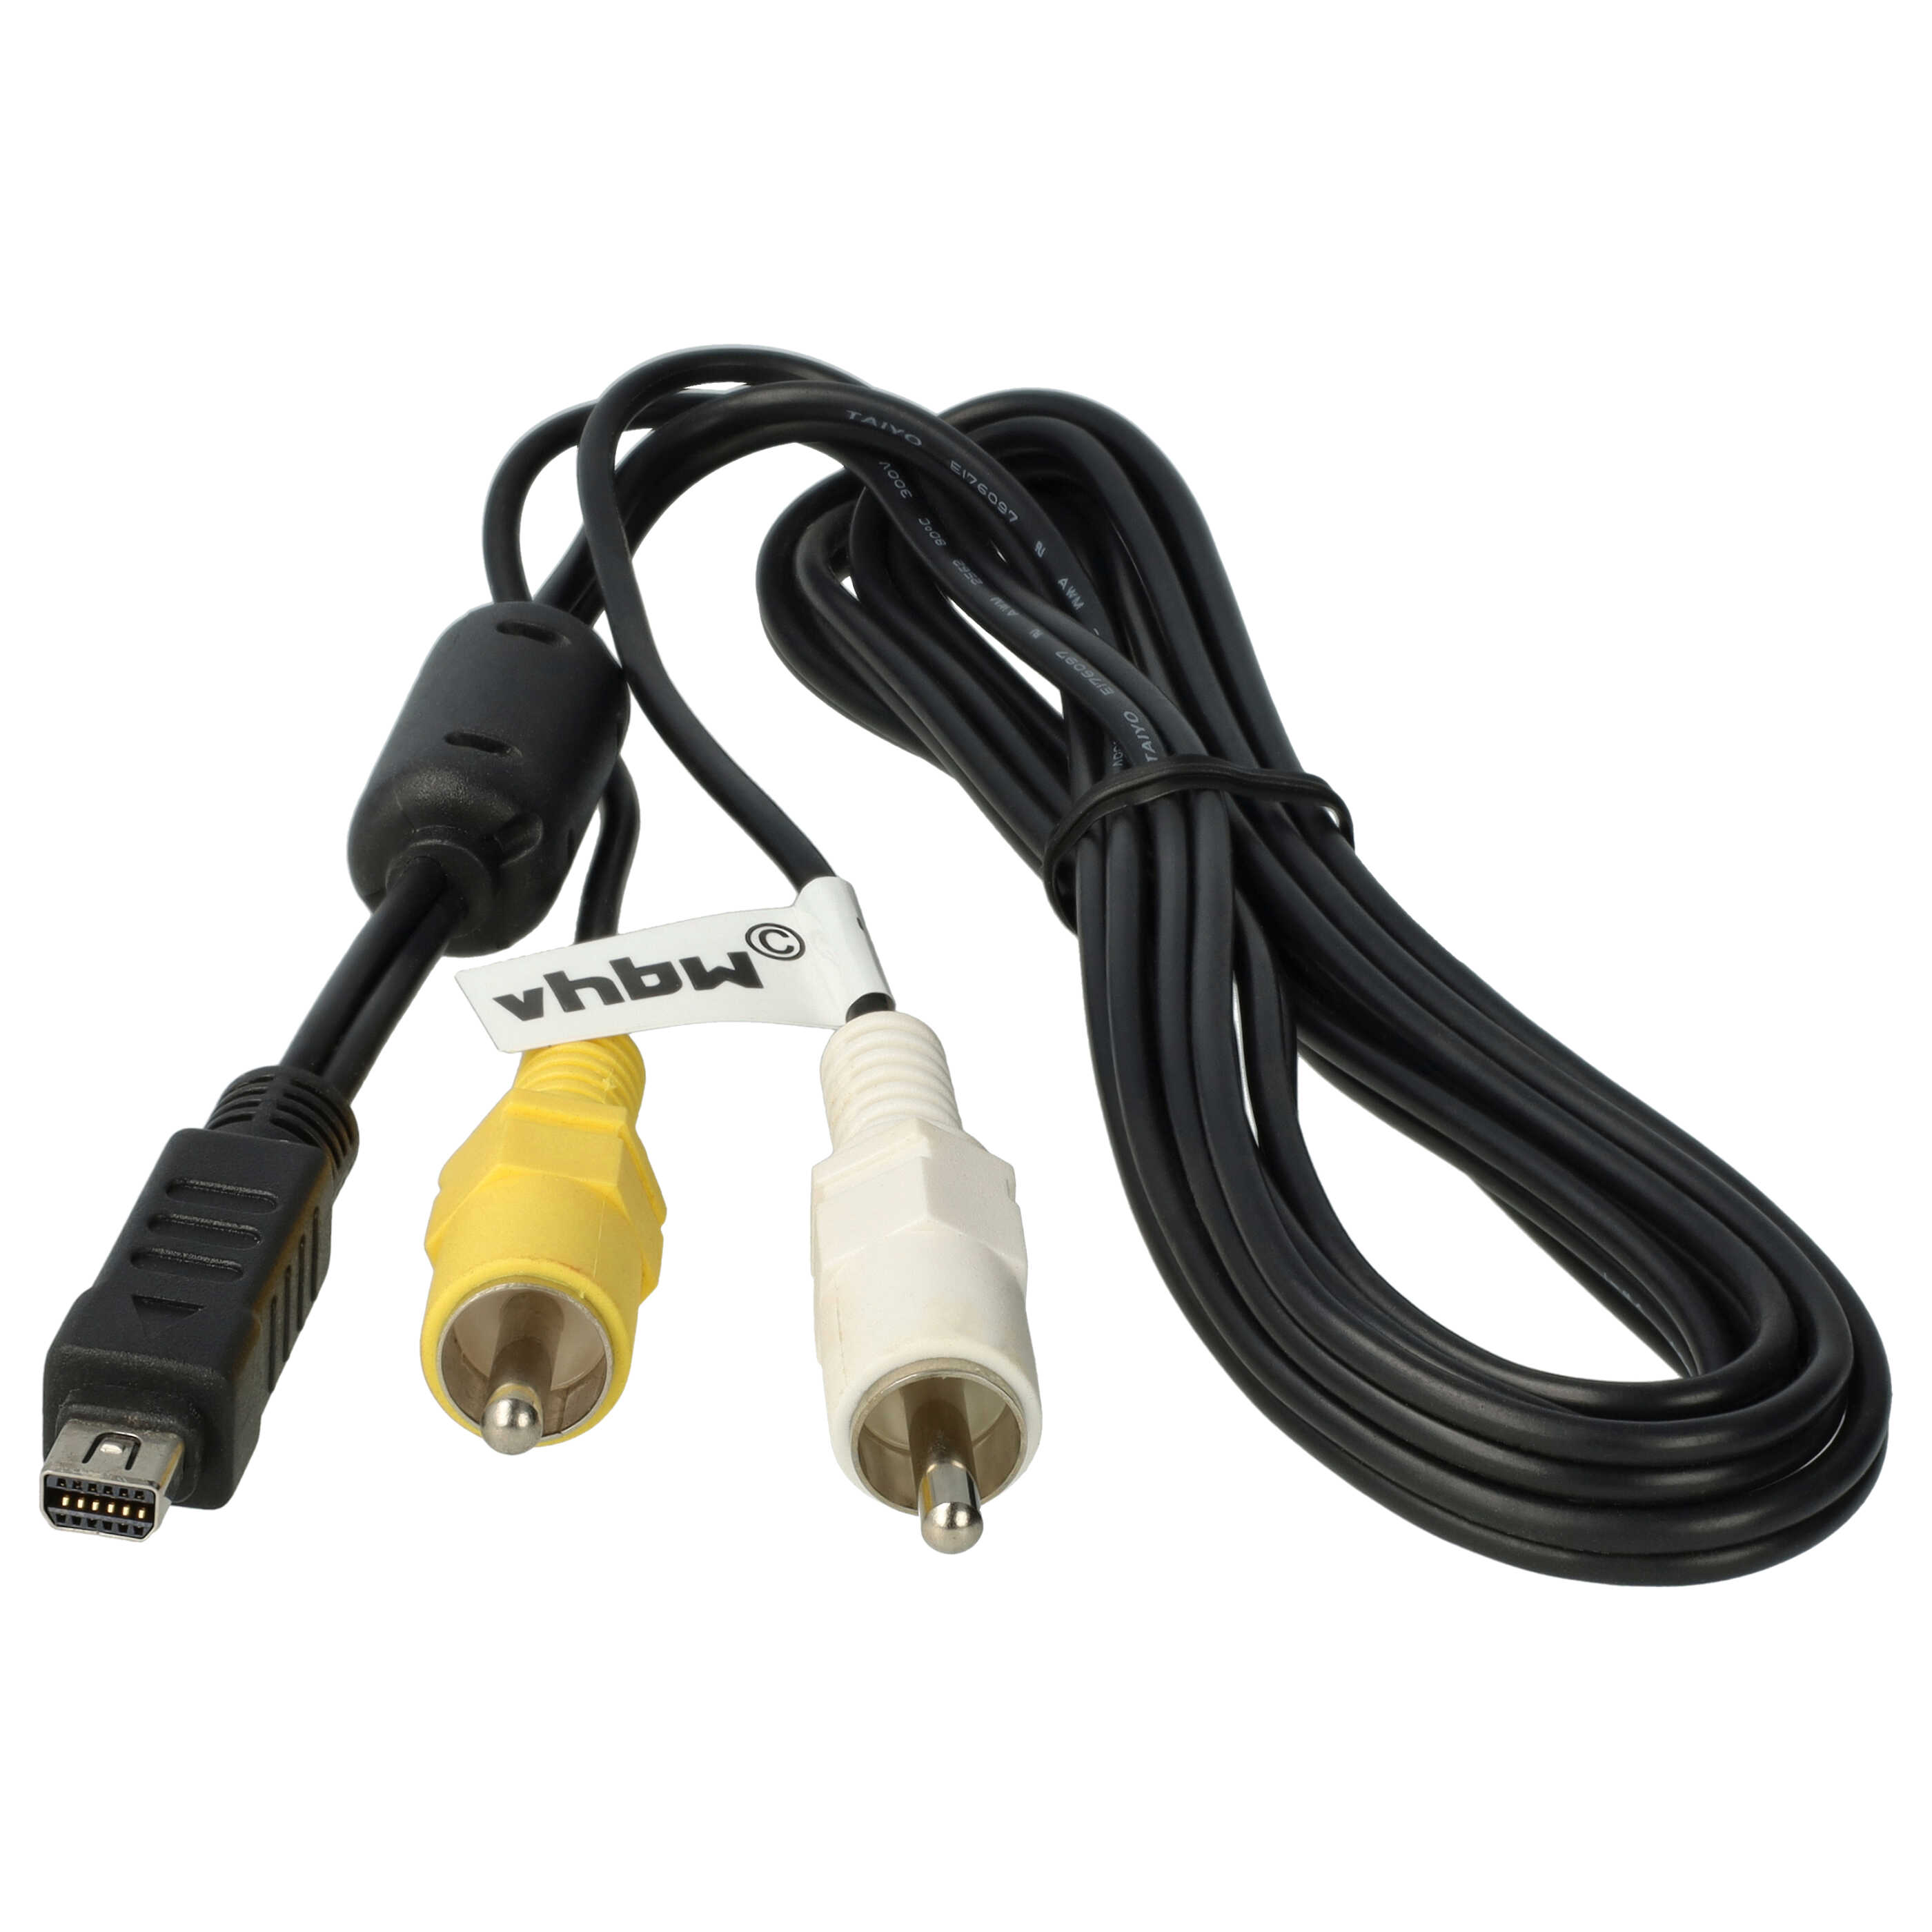 vhbw Camcorder Video Cable Replacement for Olympus CB-USB5 for Digital Camera Videocamera - AV Cable